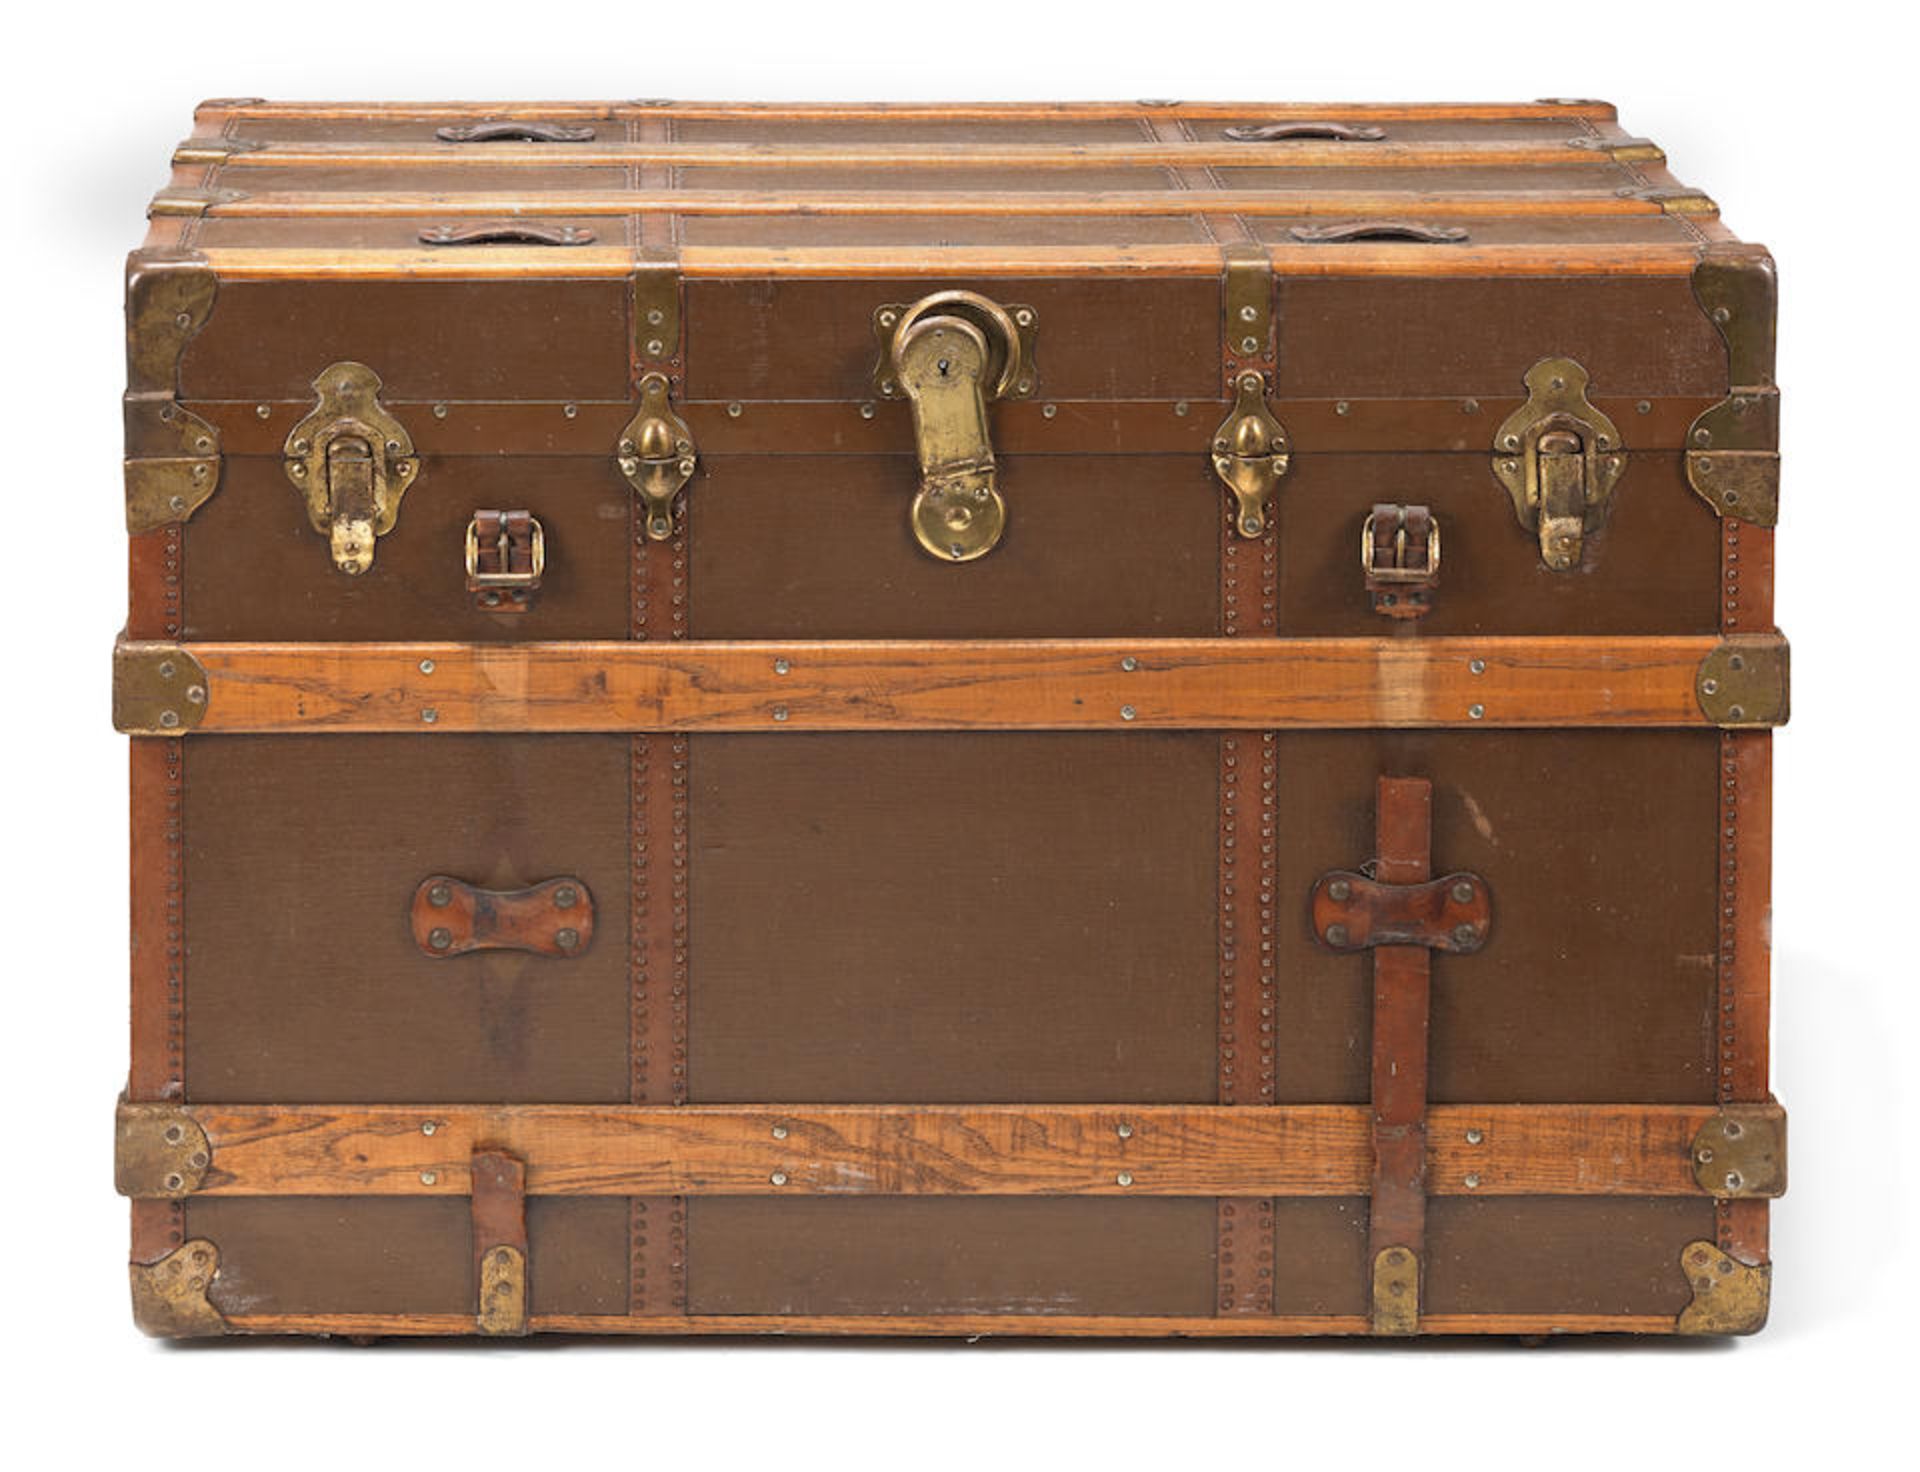 An early 20th century American steamer trunk made by Henry Likly & Co, Rochester (New York)